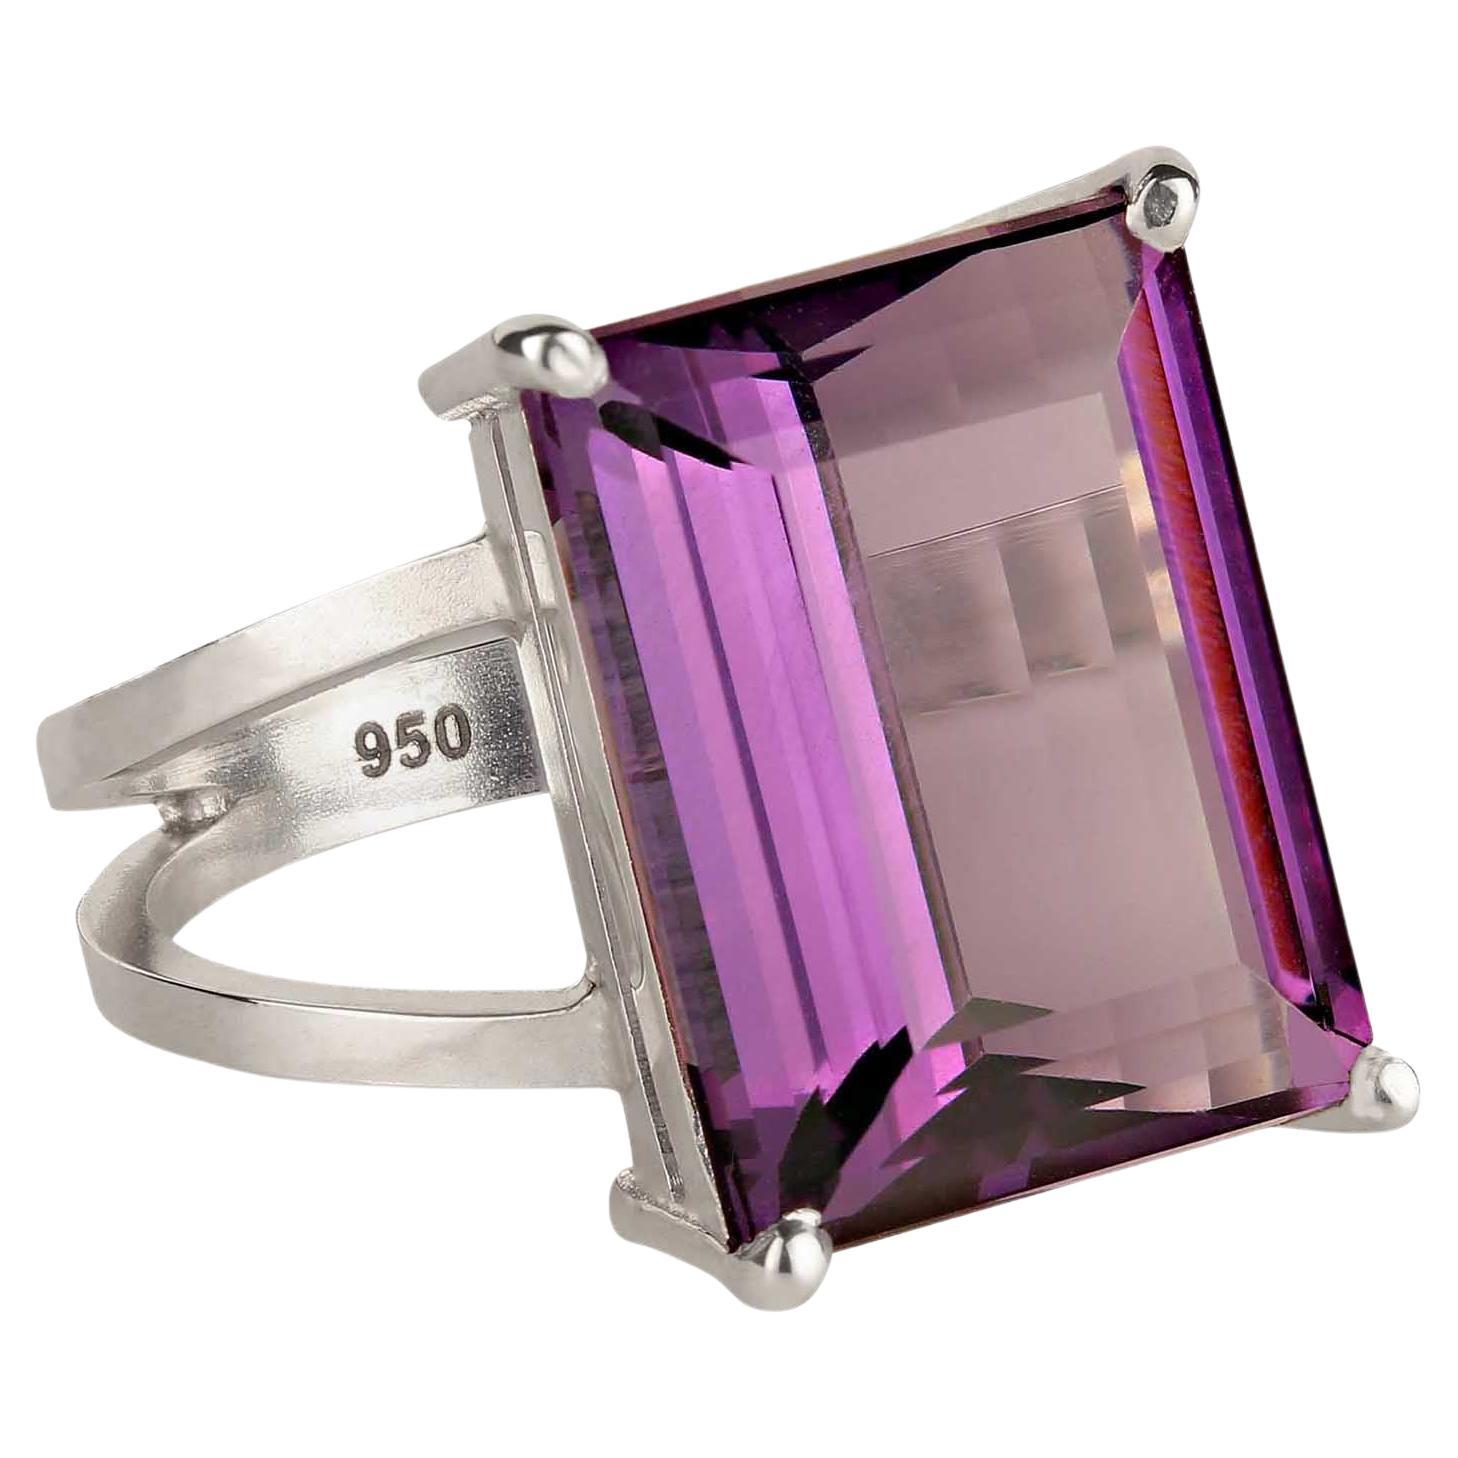 Exciting emerald cut 12Ct Amethyst and Sterling Silver ring.  This 16x12MM gemstone is set in a custom made Sterling Silver setting and the entire package comes from our favorite vendor in Belo Horizonte, Minas Gerais, Brasil. Amethyst is the